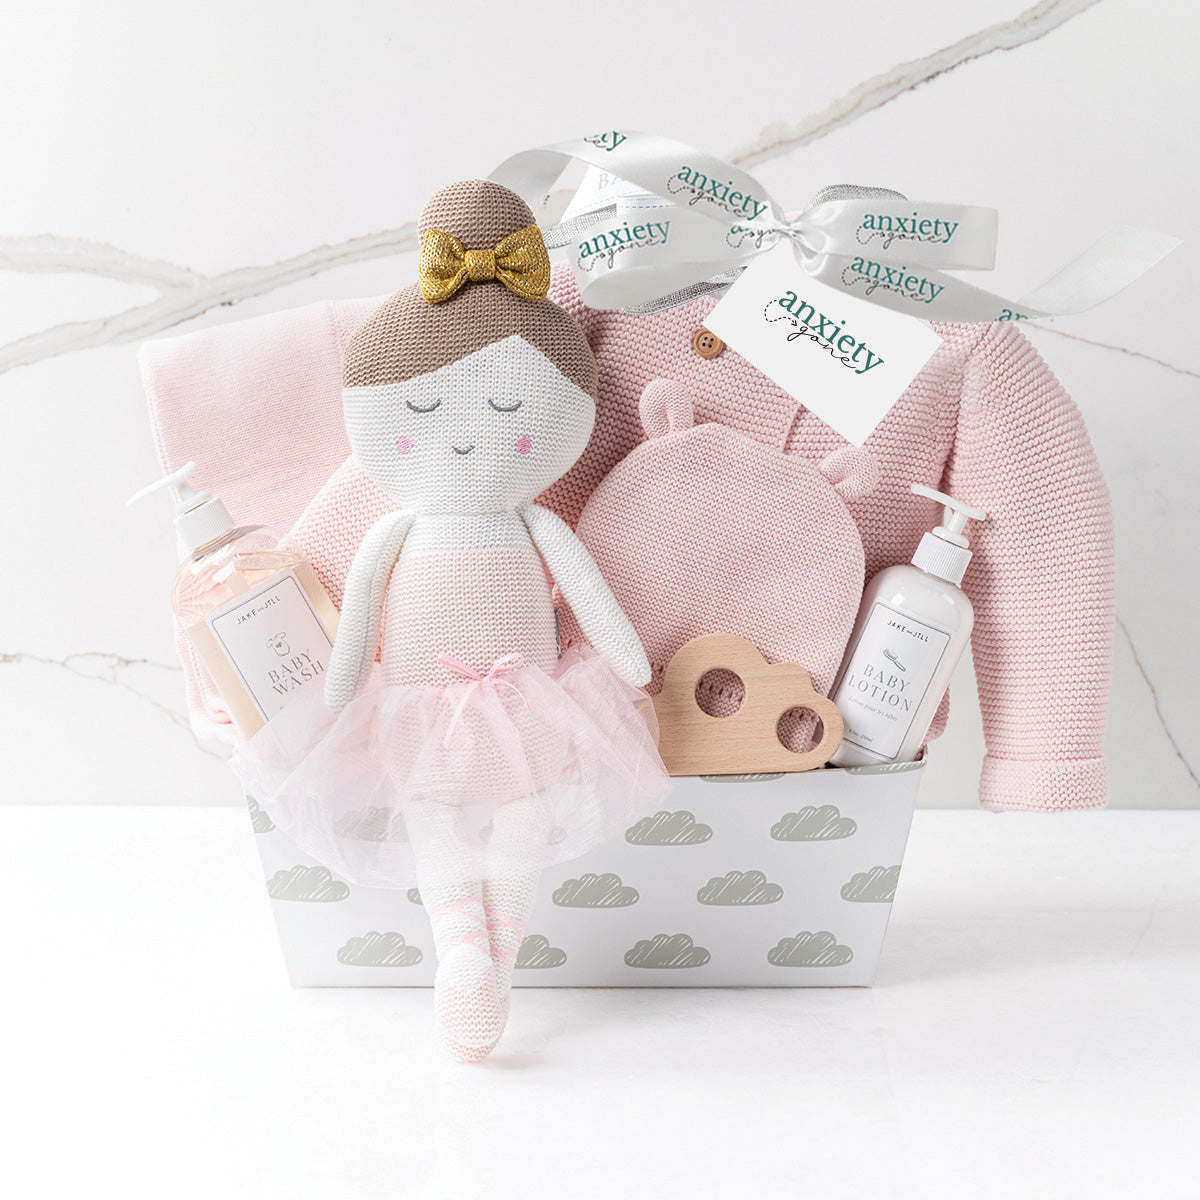 Baby gifts, baby gift baskets, baby shower gifts, christening gifts, personalized baby blankets, new baby gifts, new mom gifts,